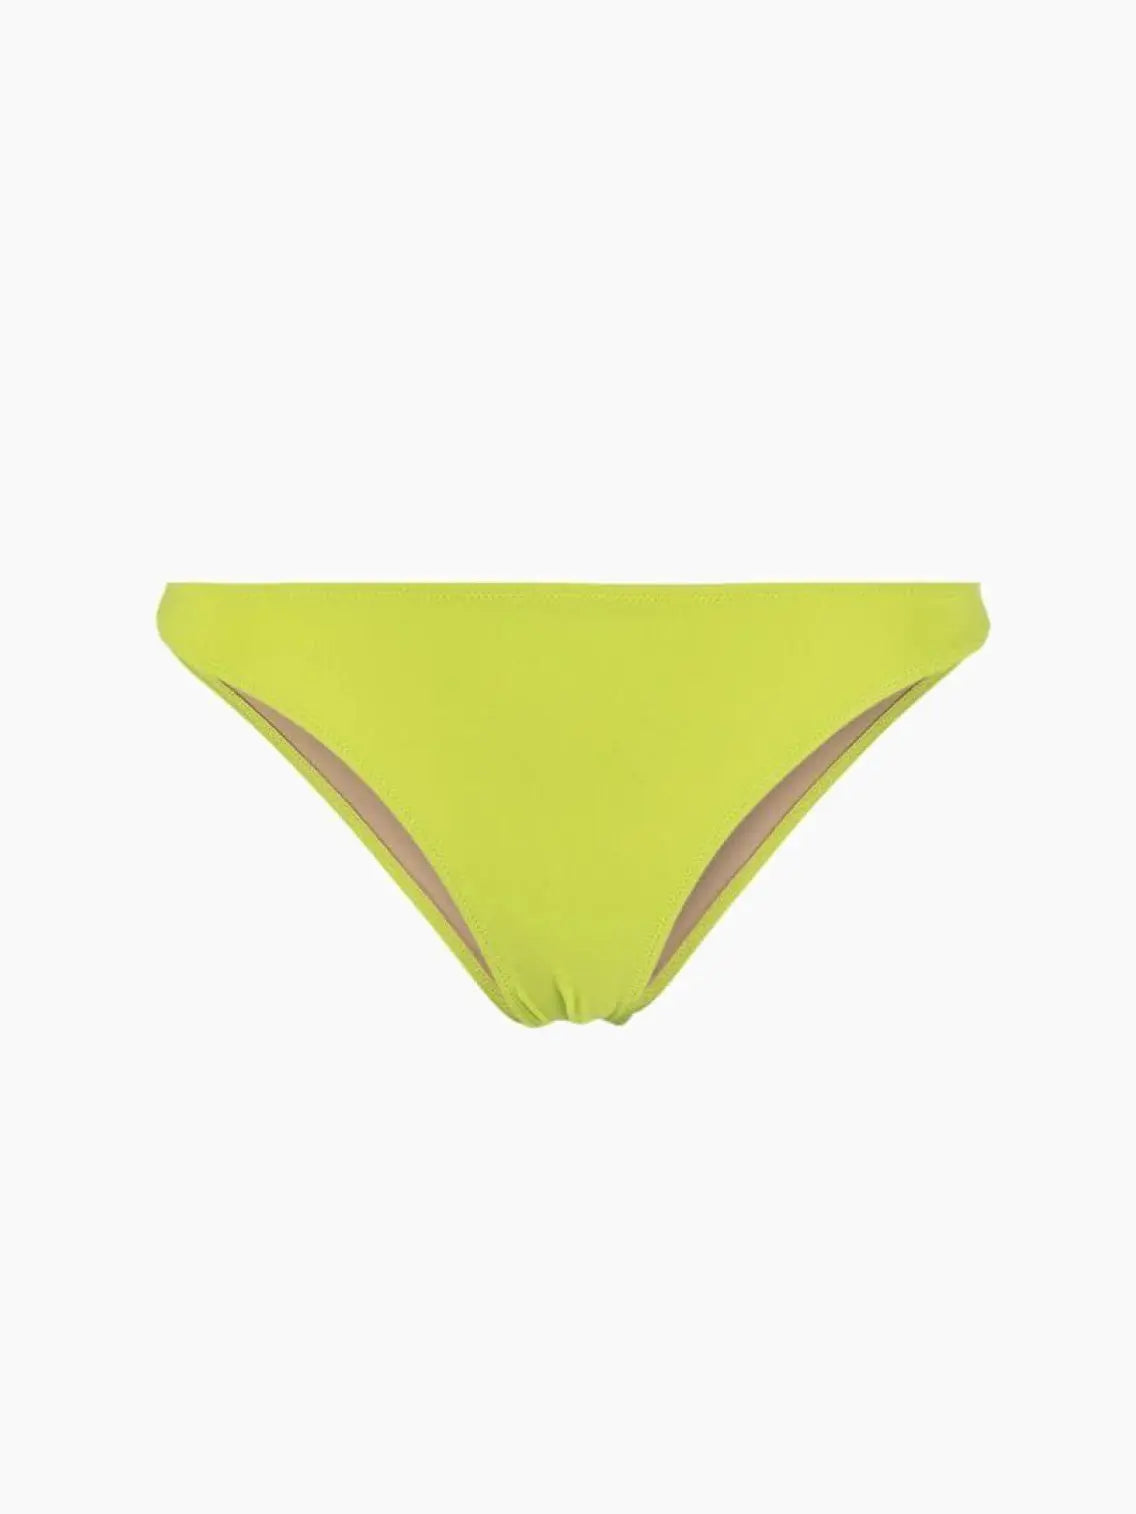 A pair of bright neon green Undici Low Waist Bikini Bottoms by Lido with a plain design, available exclusively at Bassalstore in Barcelona. The fabric is smooth and stretchy, and the style appears to be a classic bikini cut. The background is plain and solid white, making the bikini bottoms stand out prominently.